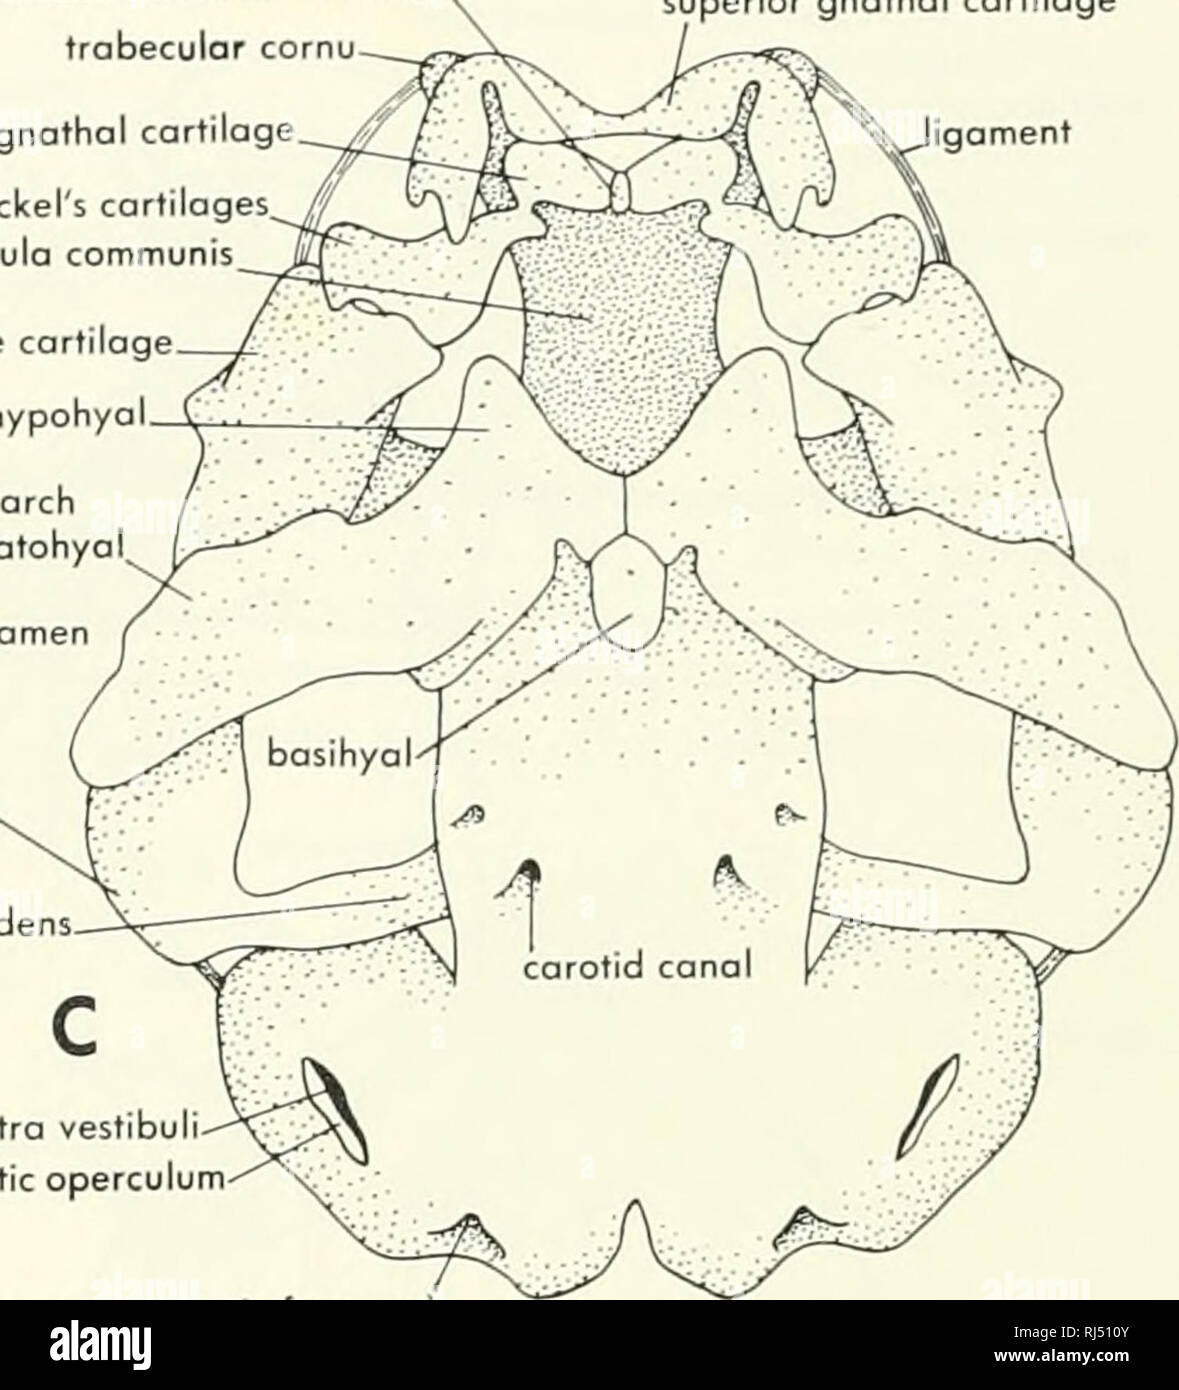 . Chordate morphology. Morphology (Animals); Chordata. intermondibular cartilage trabecular cornu inferior gnathal cartilage Meckel's cartilages. trabeculo communis prootic fenestra otic capsule quadrate cartilage hypohyal occipital arch ceratohyol. superior gnathal cartilage igoment metotic foramen superior gnathal cartilage A carotid conalX o^ic operculum fenestra vestibull otic process of quadrate cartilage processus oscendens. C. fenestra vestibuli otic operculum jugular foramen (metotic foramen) Figure 4-22. Cartilaginous jaws and chondrocranium of tadpole. A, lateral view of entire chond Stock Photo